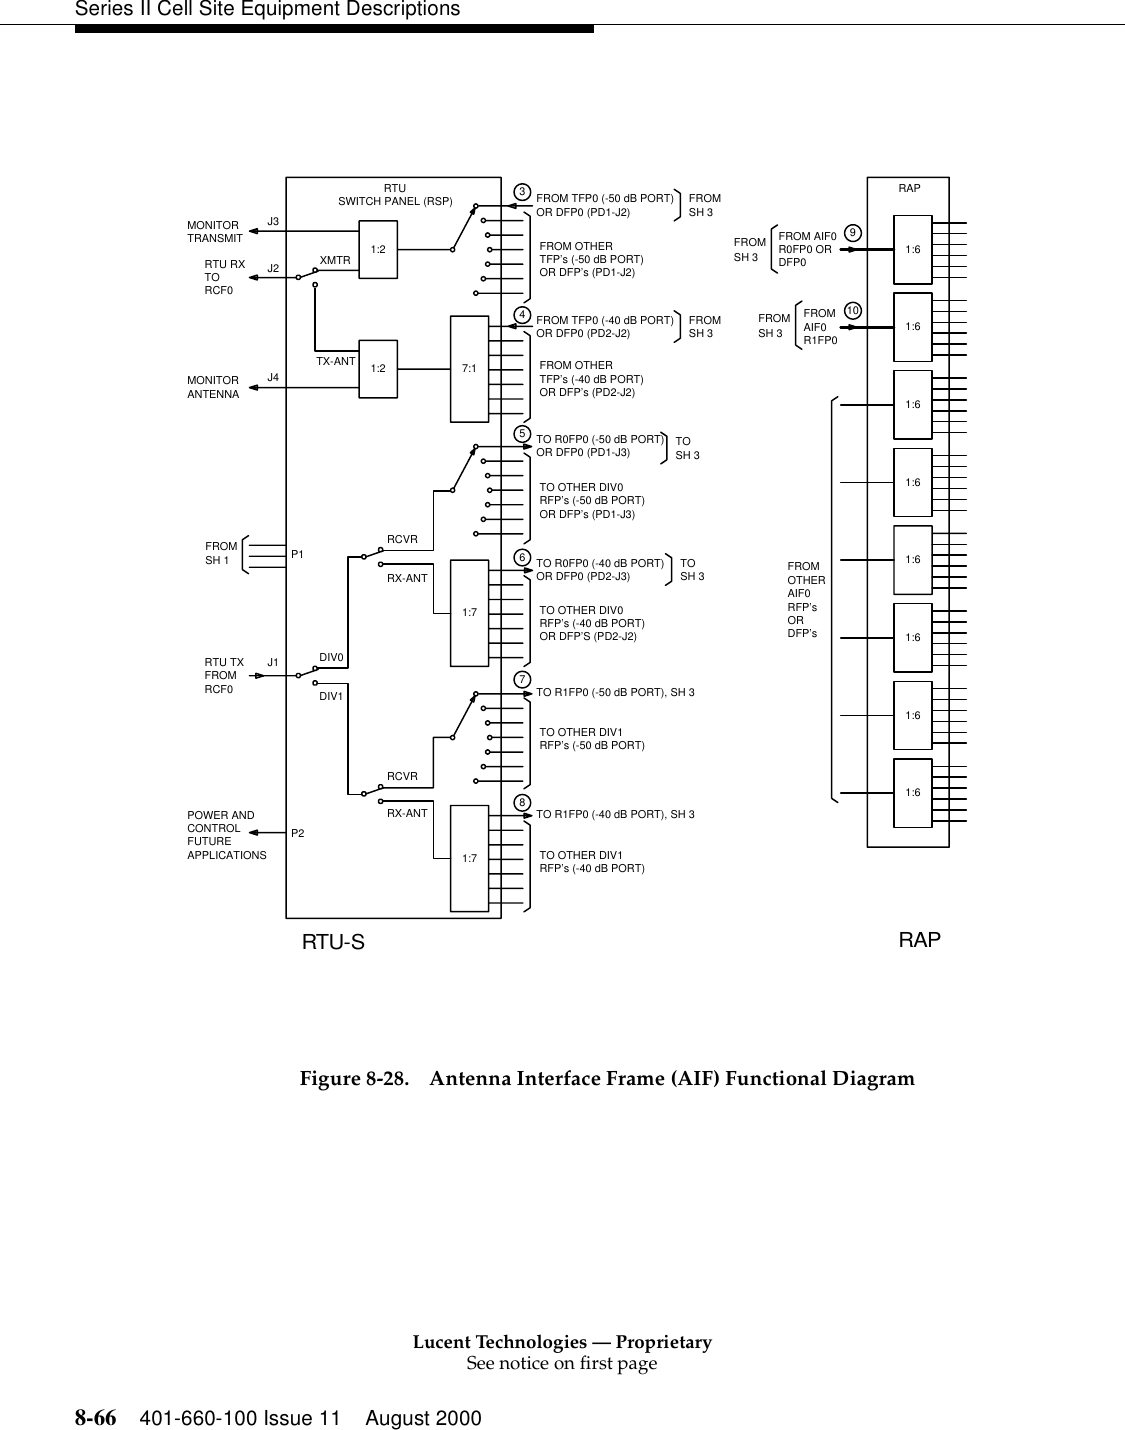 Lucent Technologies — ProprietarySee notice on first page8-66 401-660-100 Issue 11 August 2000Series II Cell Site Equipment Descriptions Figure 8-28. Antenna Interface Frame (AIF) Functional DiagramSH 1FROMFROMRCF0FUTURECONTROLANTENNAMONITORRCF0TOMONITOR543RTU TX J1FROM OTHERFROM OTHER7:11:21:2XMTRPOWER ANDTX-ANTSWITCH PANEL (RSP)RTUJ4J2J3RTU RXTRANSMITTO OTHER DIV0P11:71:7876P2DIV1DIV0TOTO OTHER DIV1TO OTHER DIV1RFP’s (-50 dB PORT)RX-ANTRCVRRX-ANTRCVRAPPLICATIONSAIF0DFP’sORRFP’sOTHERFROM1:61:61:61:6RFP’s (-40 dB PORT)TO R1FP0 (-40 dB PORT), SH 3TO R1FP0 (-50 dB PORT), SH 3SH 3RFP’s (-40 dB PORT)RFP’s (-50 dB PORT)OR DFP0 (PD2-J3)TO R0FP0 (-40 dB PORT)OR DFP’S (PD2-J2)FROMSH 3FROMSH 3FROMTO R0FP0 (-50 dB PORT)FROMR1FP0AIF0FROM 109RAP1:61:61:6DFP0R0FP0 ORFROM AIF0SH 3TOSH 3OR DFP0 (PD1-J3)OR DFP’s (PD2-J2)OR DFP’s (PD1-J2)TFP’s (-40 dB PORT)TFP’s (-50 dB PORT)TO OTHER DIV0OR DFP0 (PD2-J2)OR DFP0 (PD1-J2)FROM TFP0 (-40 dB PORT)FROM TFP0 (-50 dB PORT) SH 31:6OR DFP’s (PD1-J3)RTU-S RAP